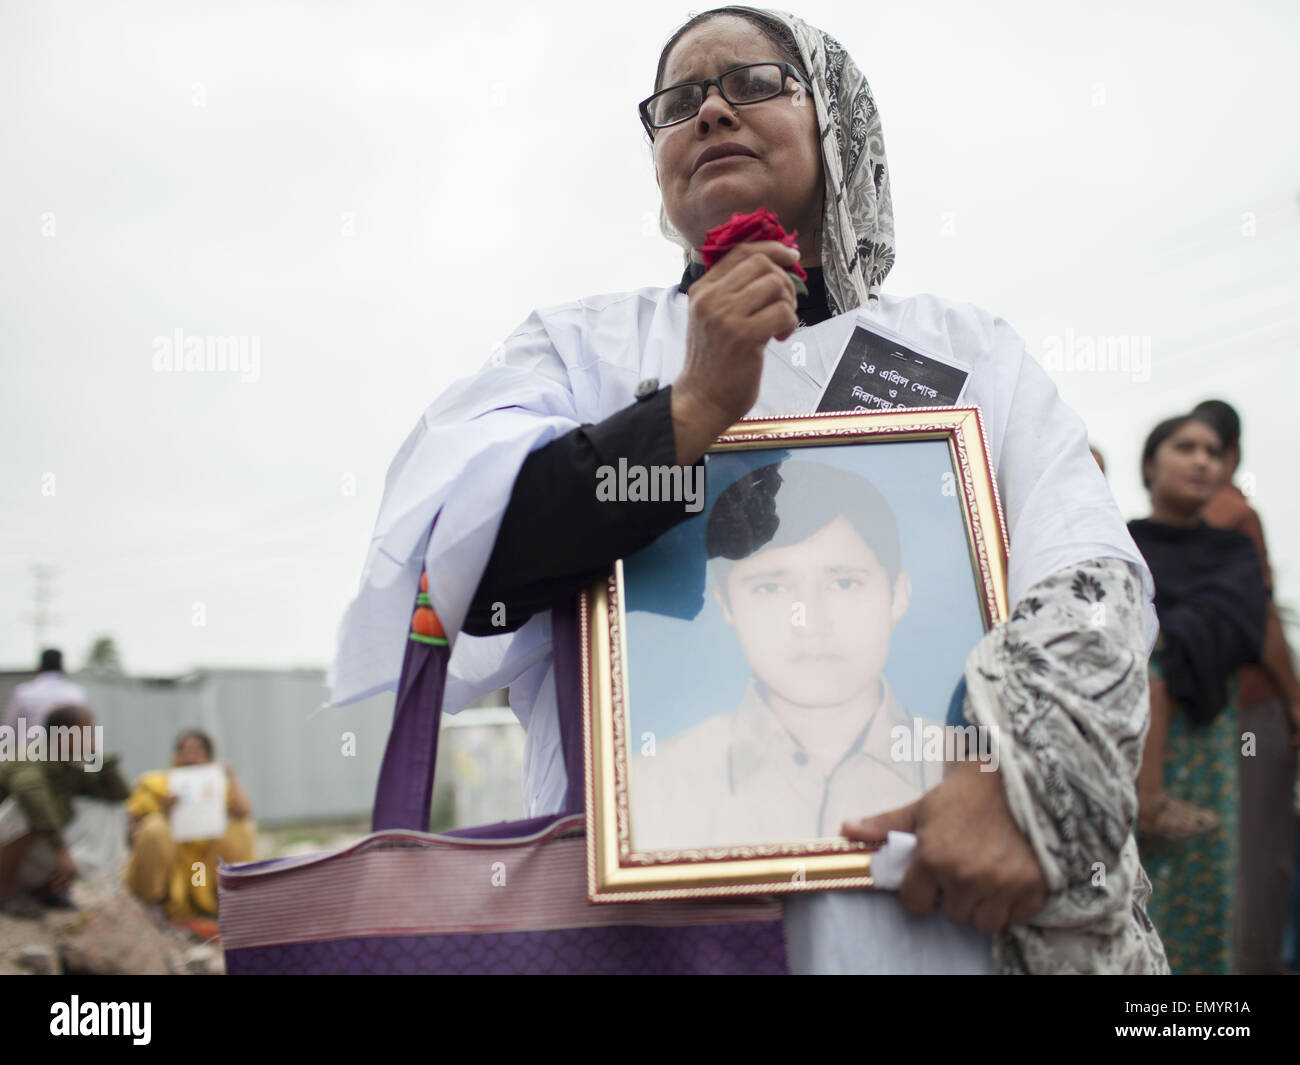 April 24, 2015 - RAHELA KHATUN holds the photo of her missing son FAZLE RABBI as she offers flowers at the memorial site of the Rana Plaza building to mark the second anniversary of the buildings collapse, at Savar, in Dhaka, Bangladesh, 24 April 2015. Relatives of victims, and members of different garment organizations attended the commemoration ceremony in front of the Rana Plaza building site, where two years ago, according to ActionAid, 1,135 workers died and about 2,500 were injured in the collapse, which highlighted the unsafe labor conditions for many of the four million workers in Bang Stock Photo